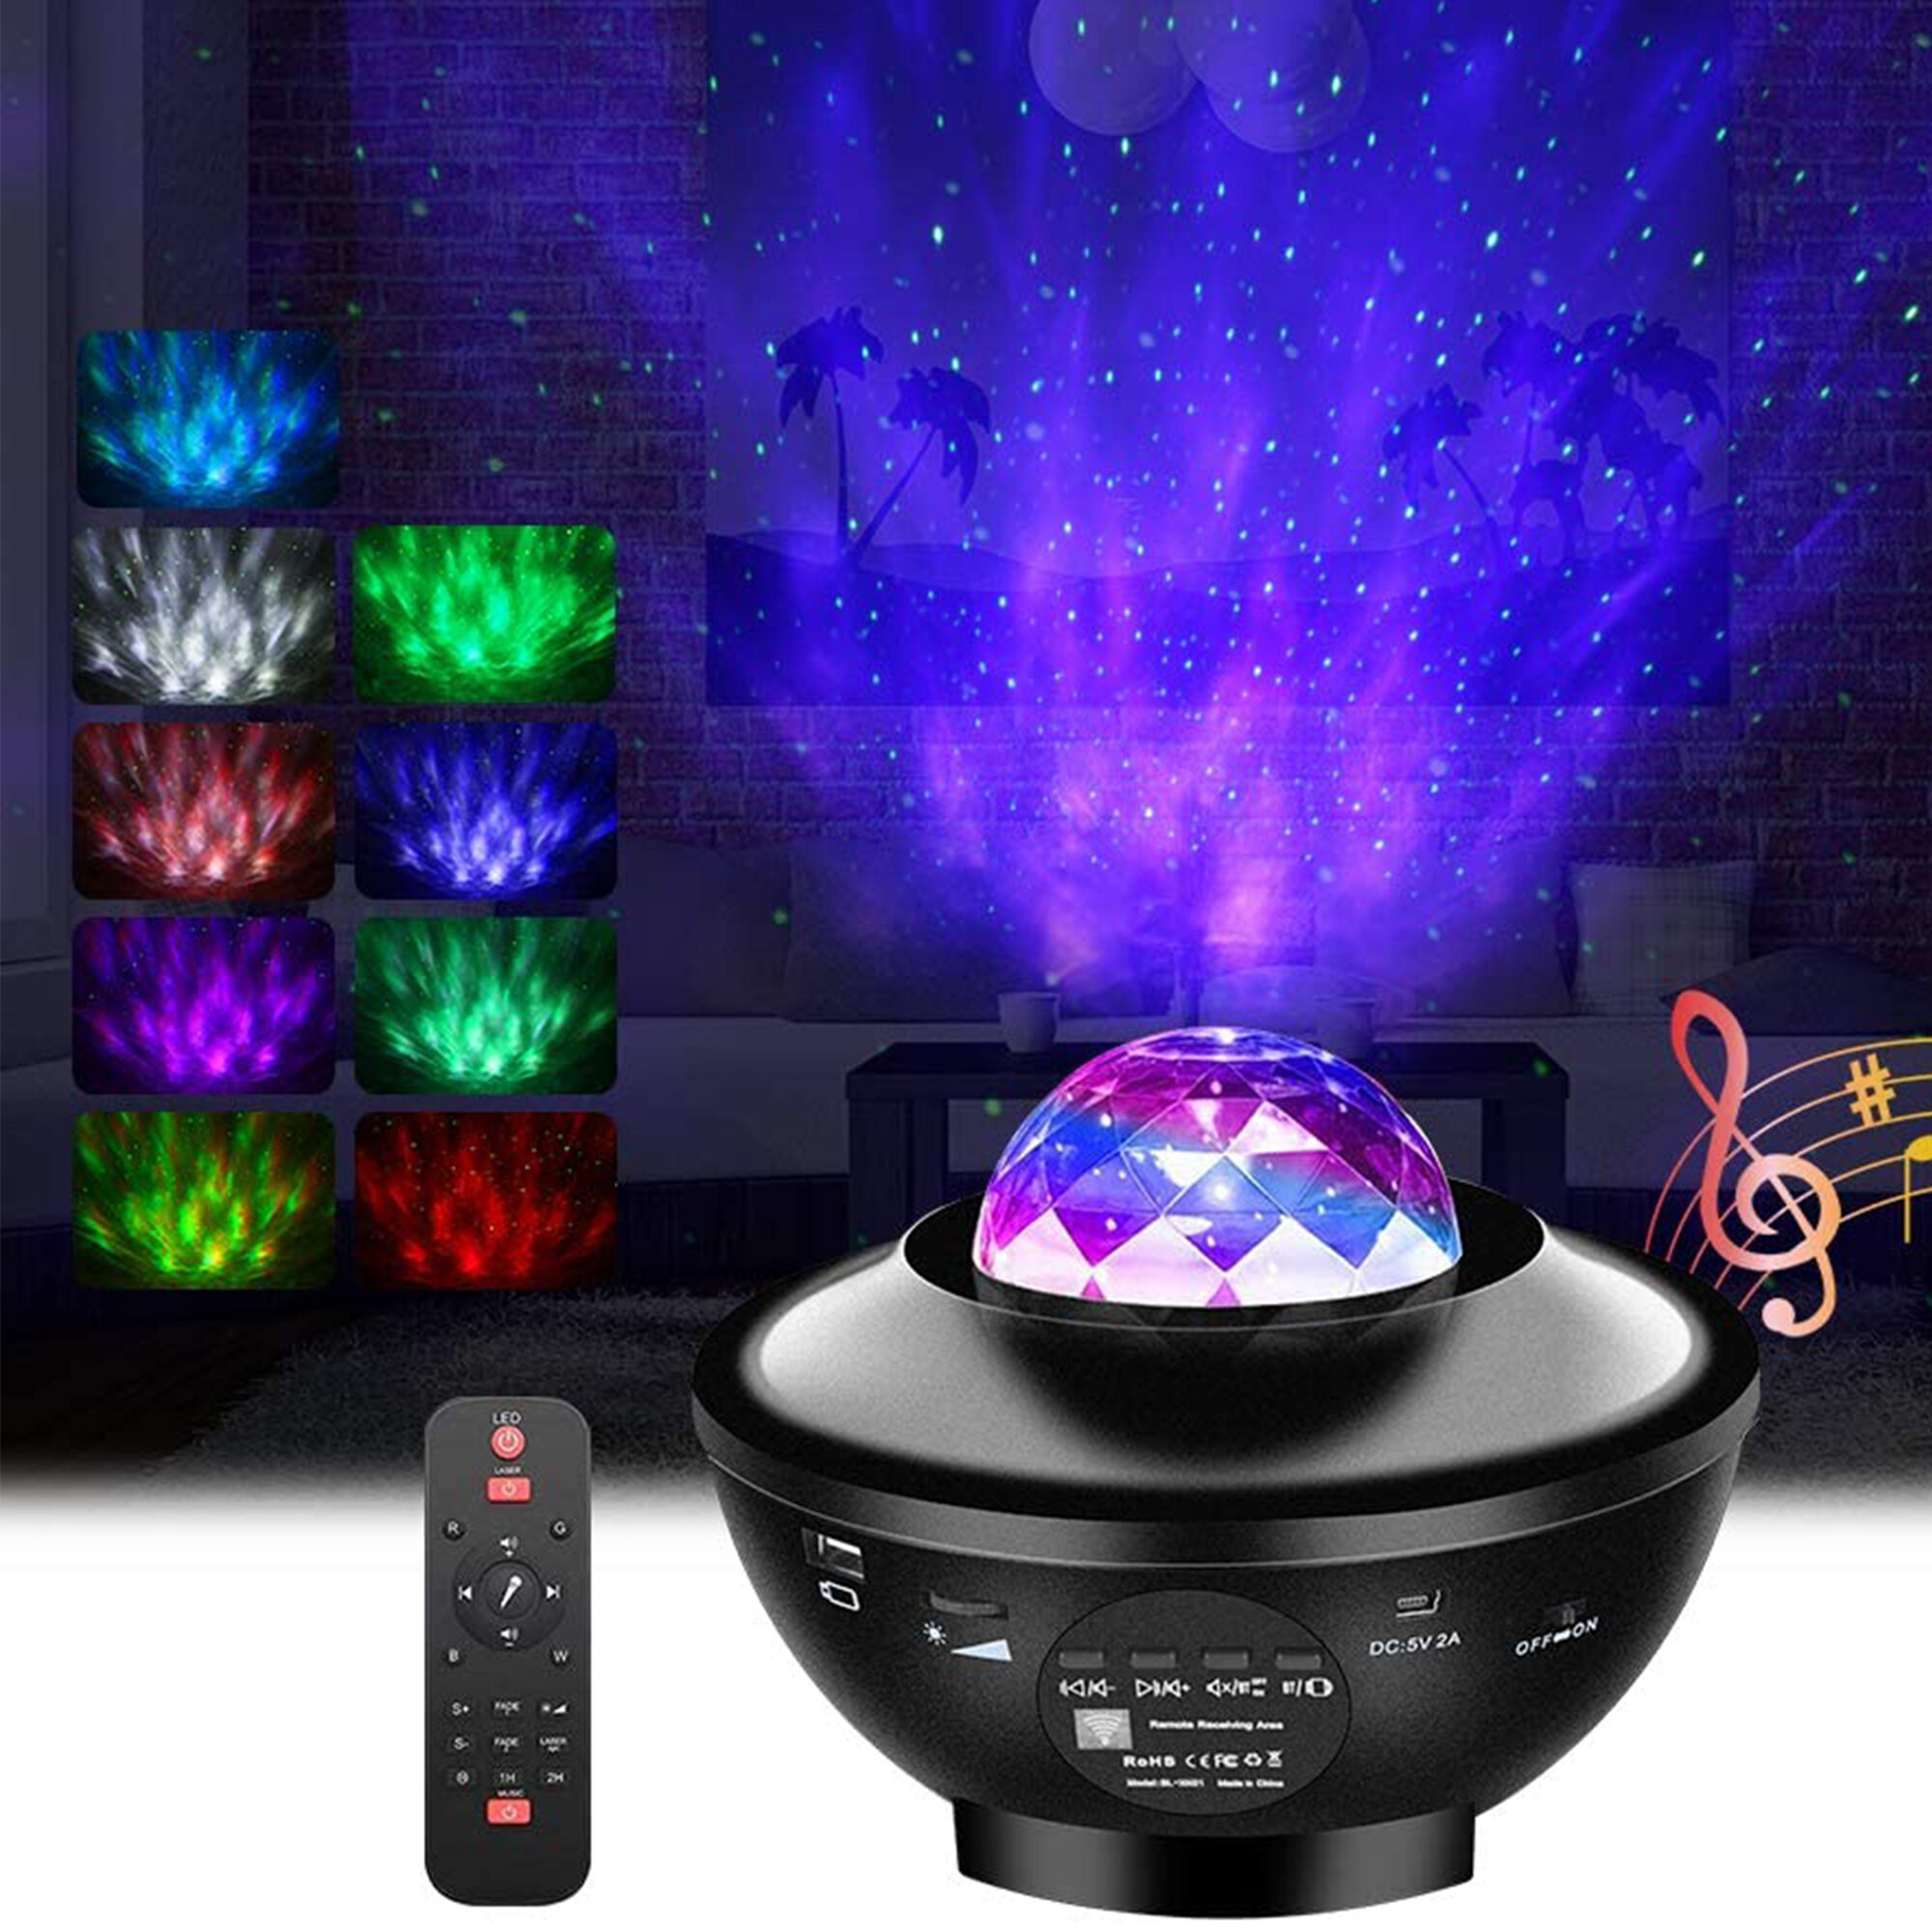 Star Projector Night Light Projector with LED Galaxy Ocean Wave Projector Bluetooth Music Speaker for Kid Adult Bedroom,Game Rooms,Party,Home Theatre,Night Light Ambiance-Black